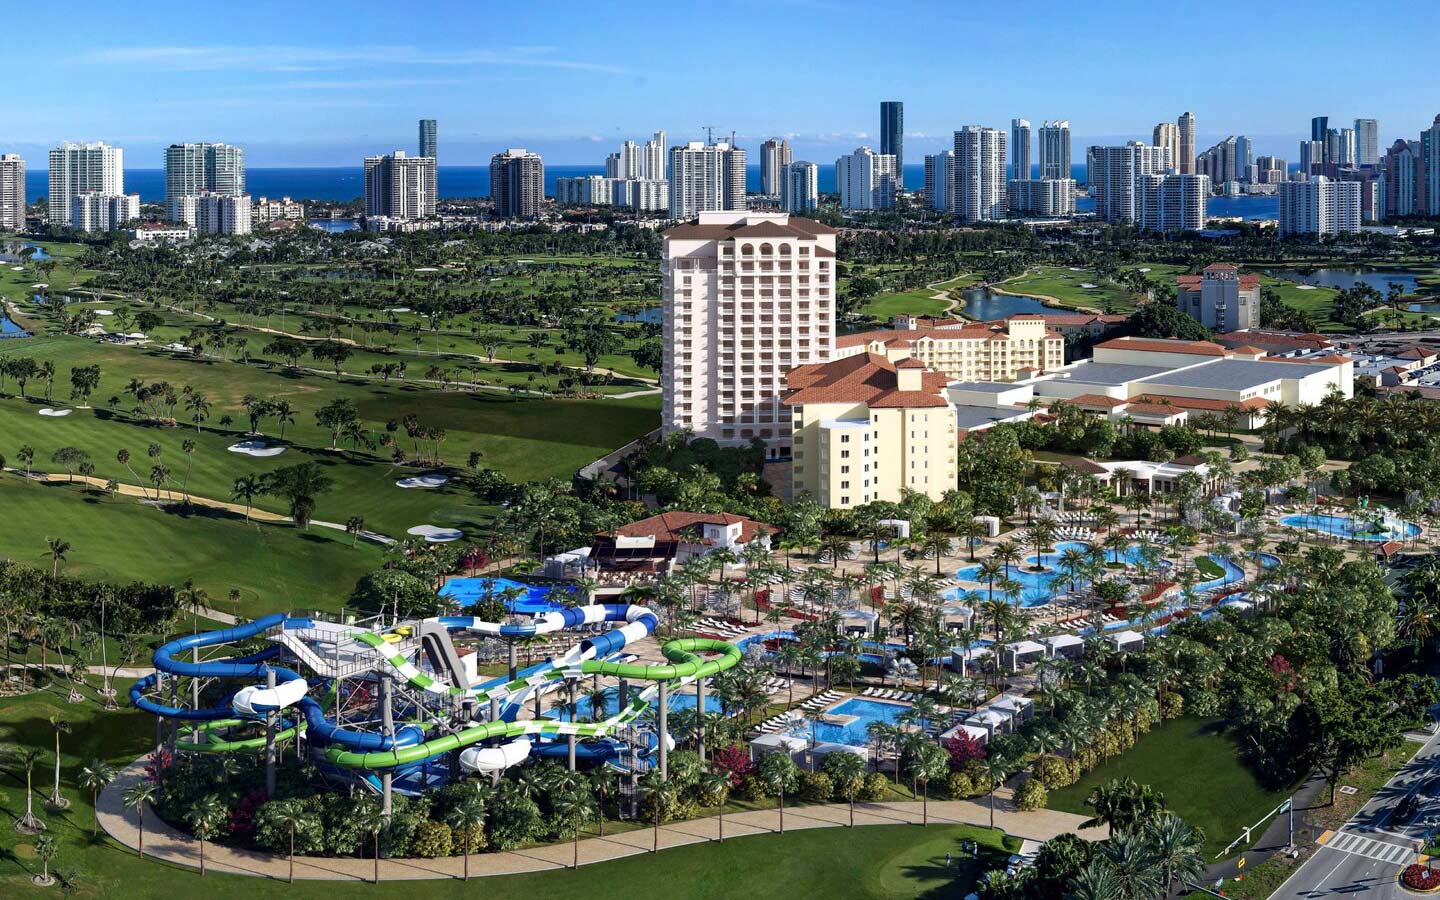 Aerial view of the JW Marriott Miami Turnberry Resort & Spa